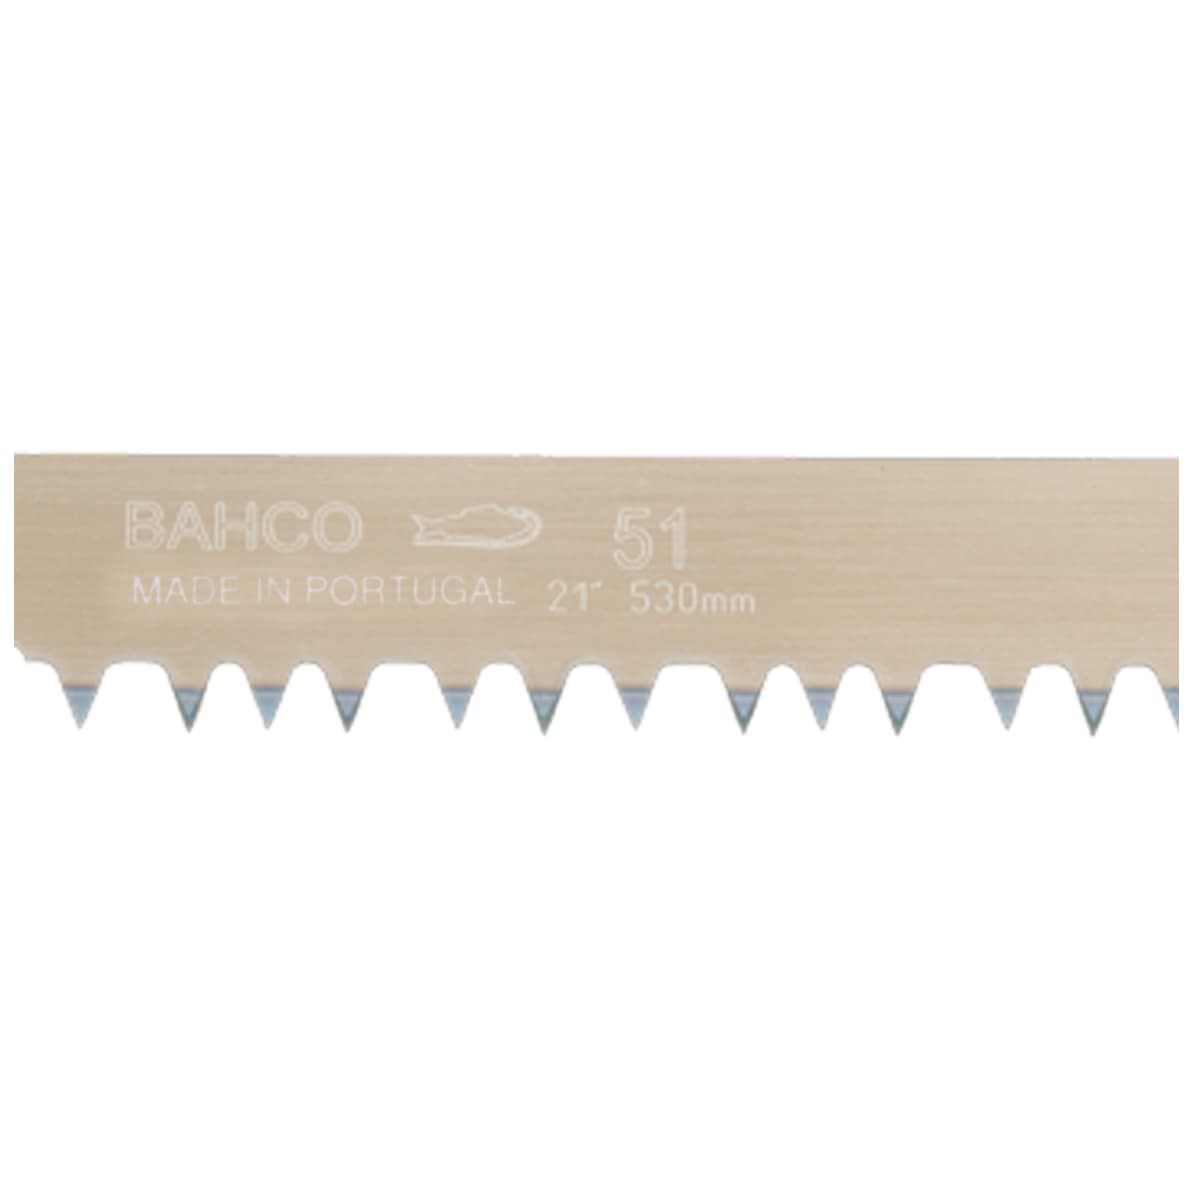 Bahco Bucksaw / Bow Saw Replacement Blade - Dry Wood - Peg Toothing